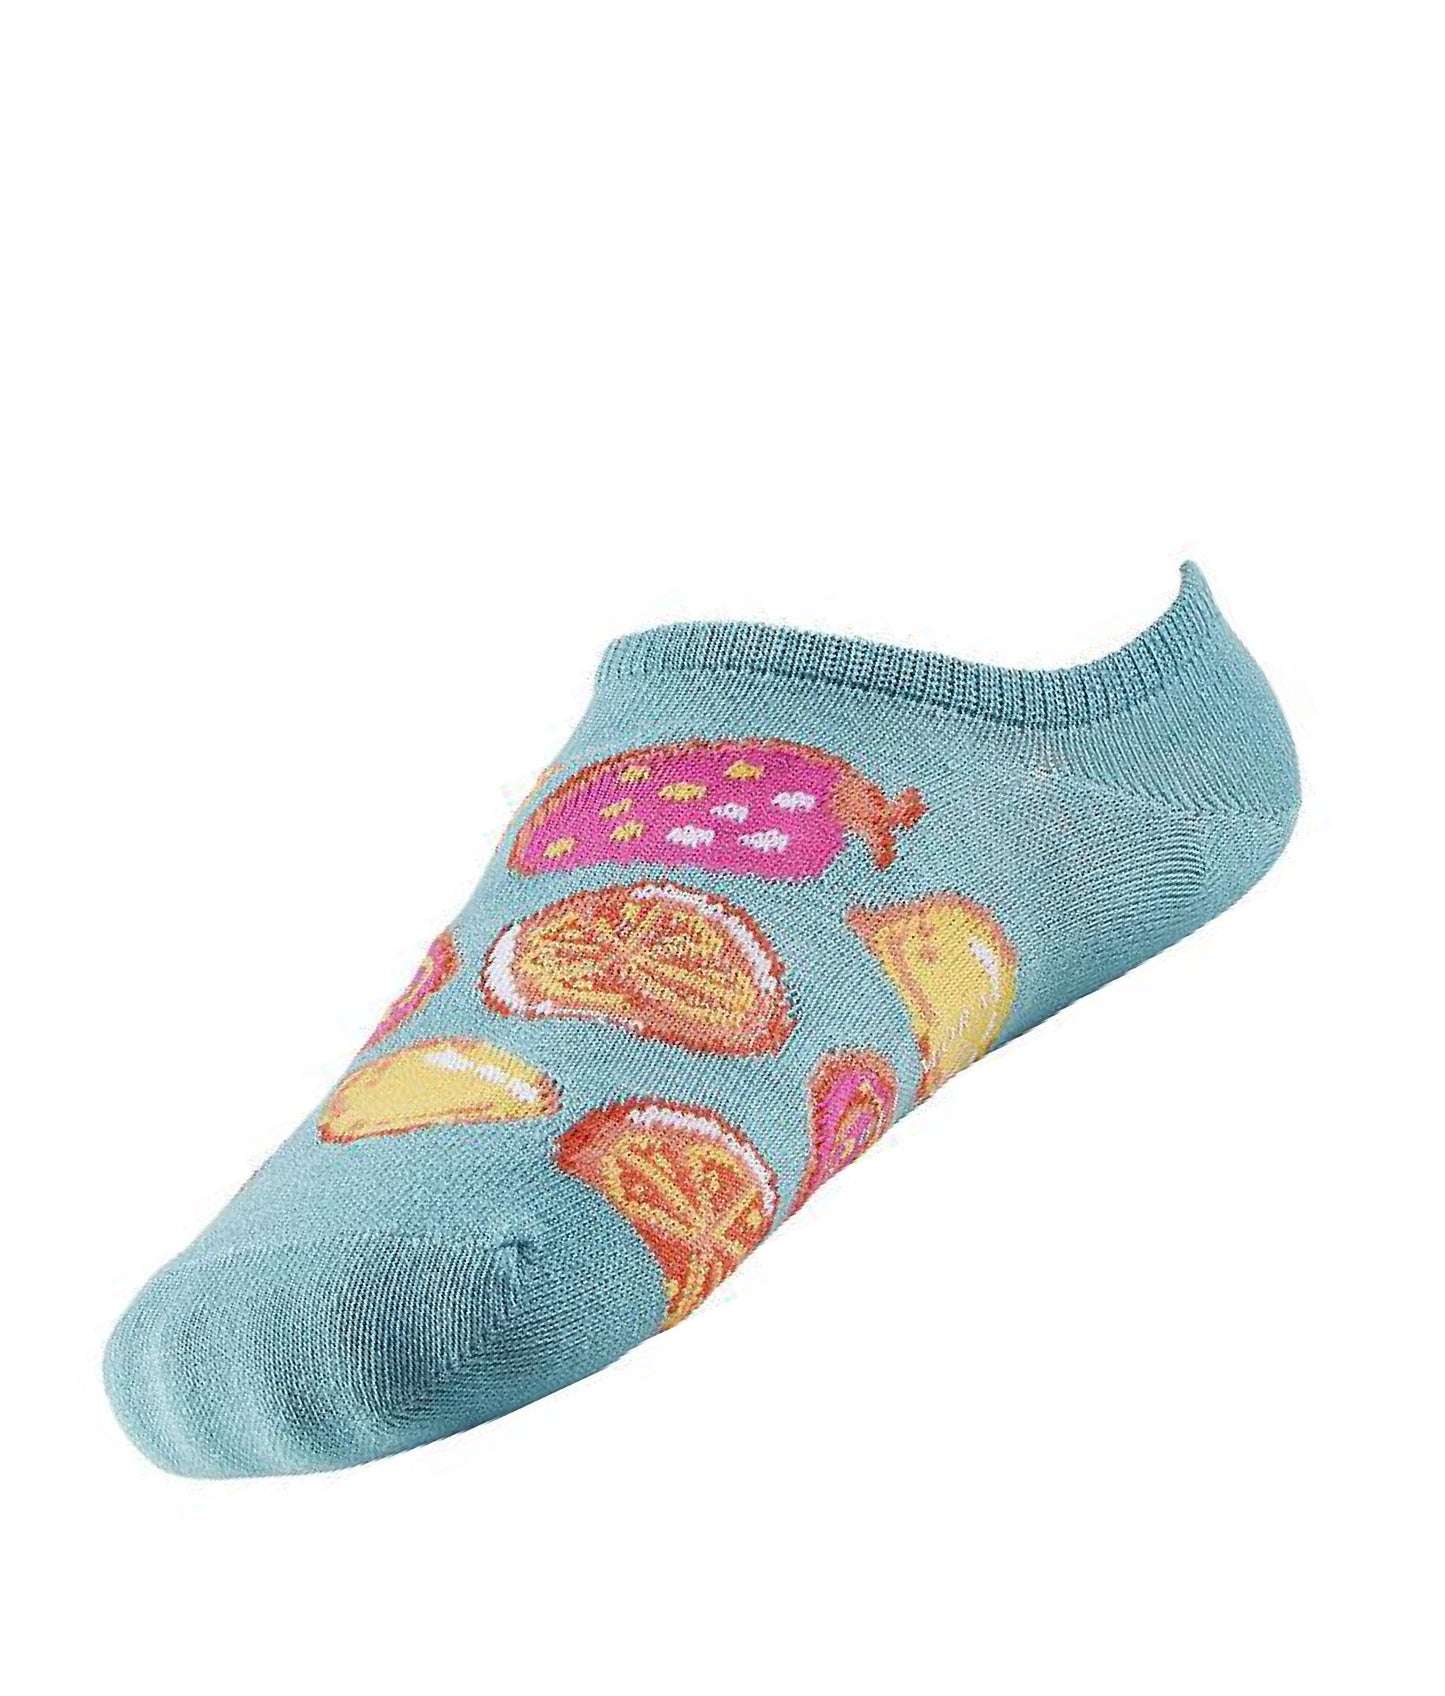 Ysabel Mora Fruit Low Sock - Light blue low ankle cotton sneaker no show socks with a multicoloured fruit pattern in shades of pink, yellow and orange.